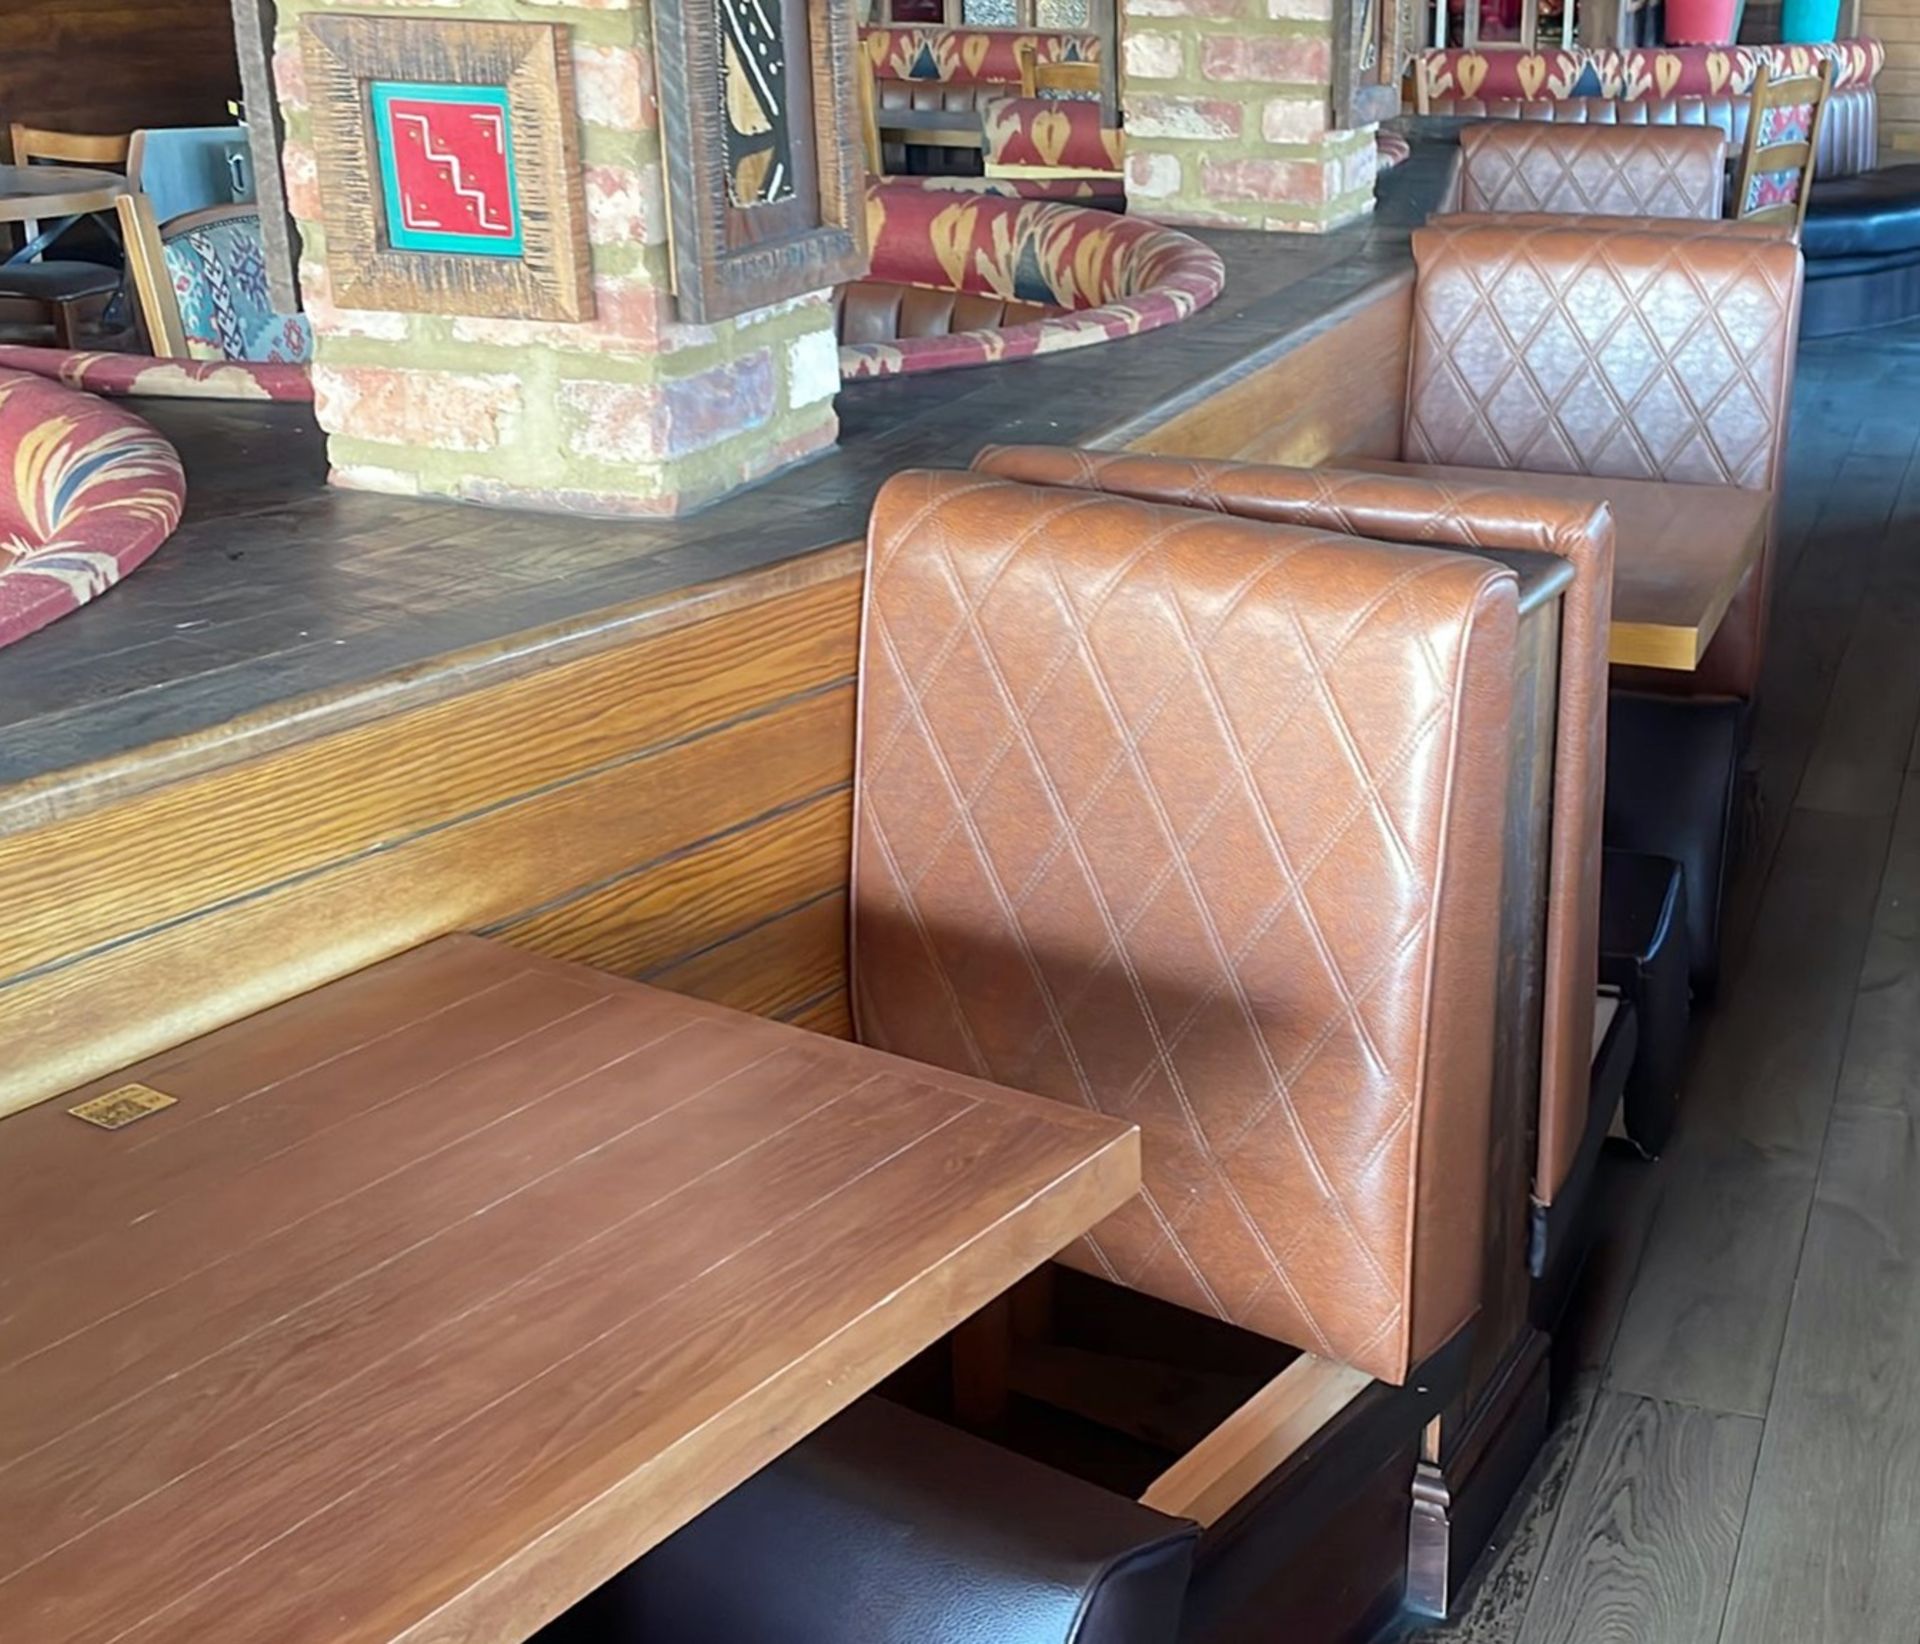 1 x Collection of Restaurant Single Seat Seating Benches - Includes 2 x End Benches and 3 x Back - Image 8 of 8